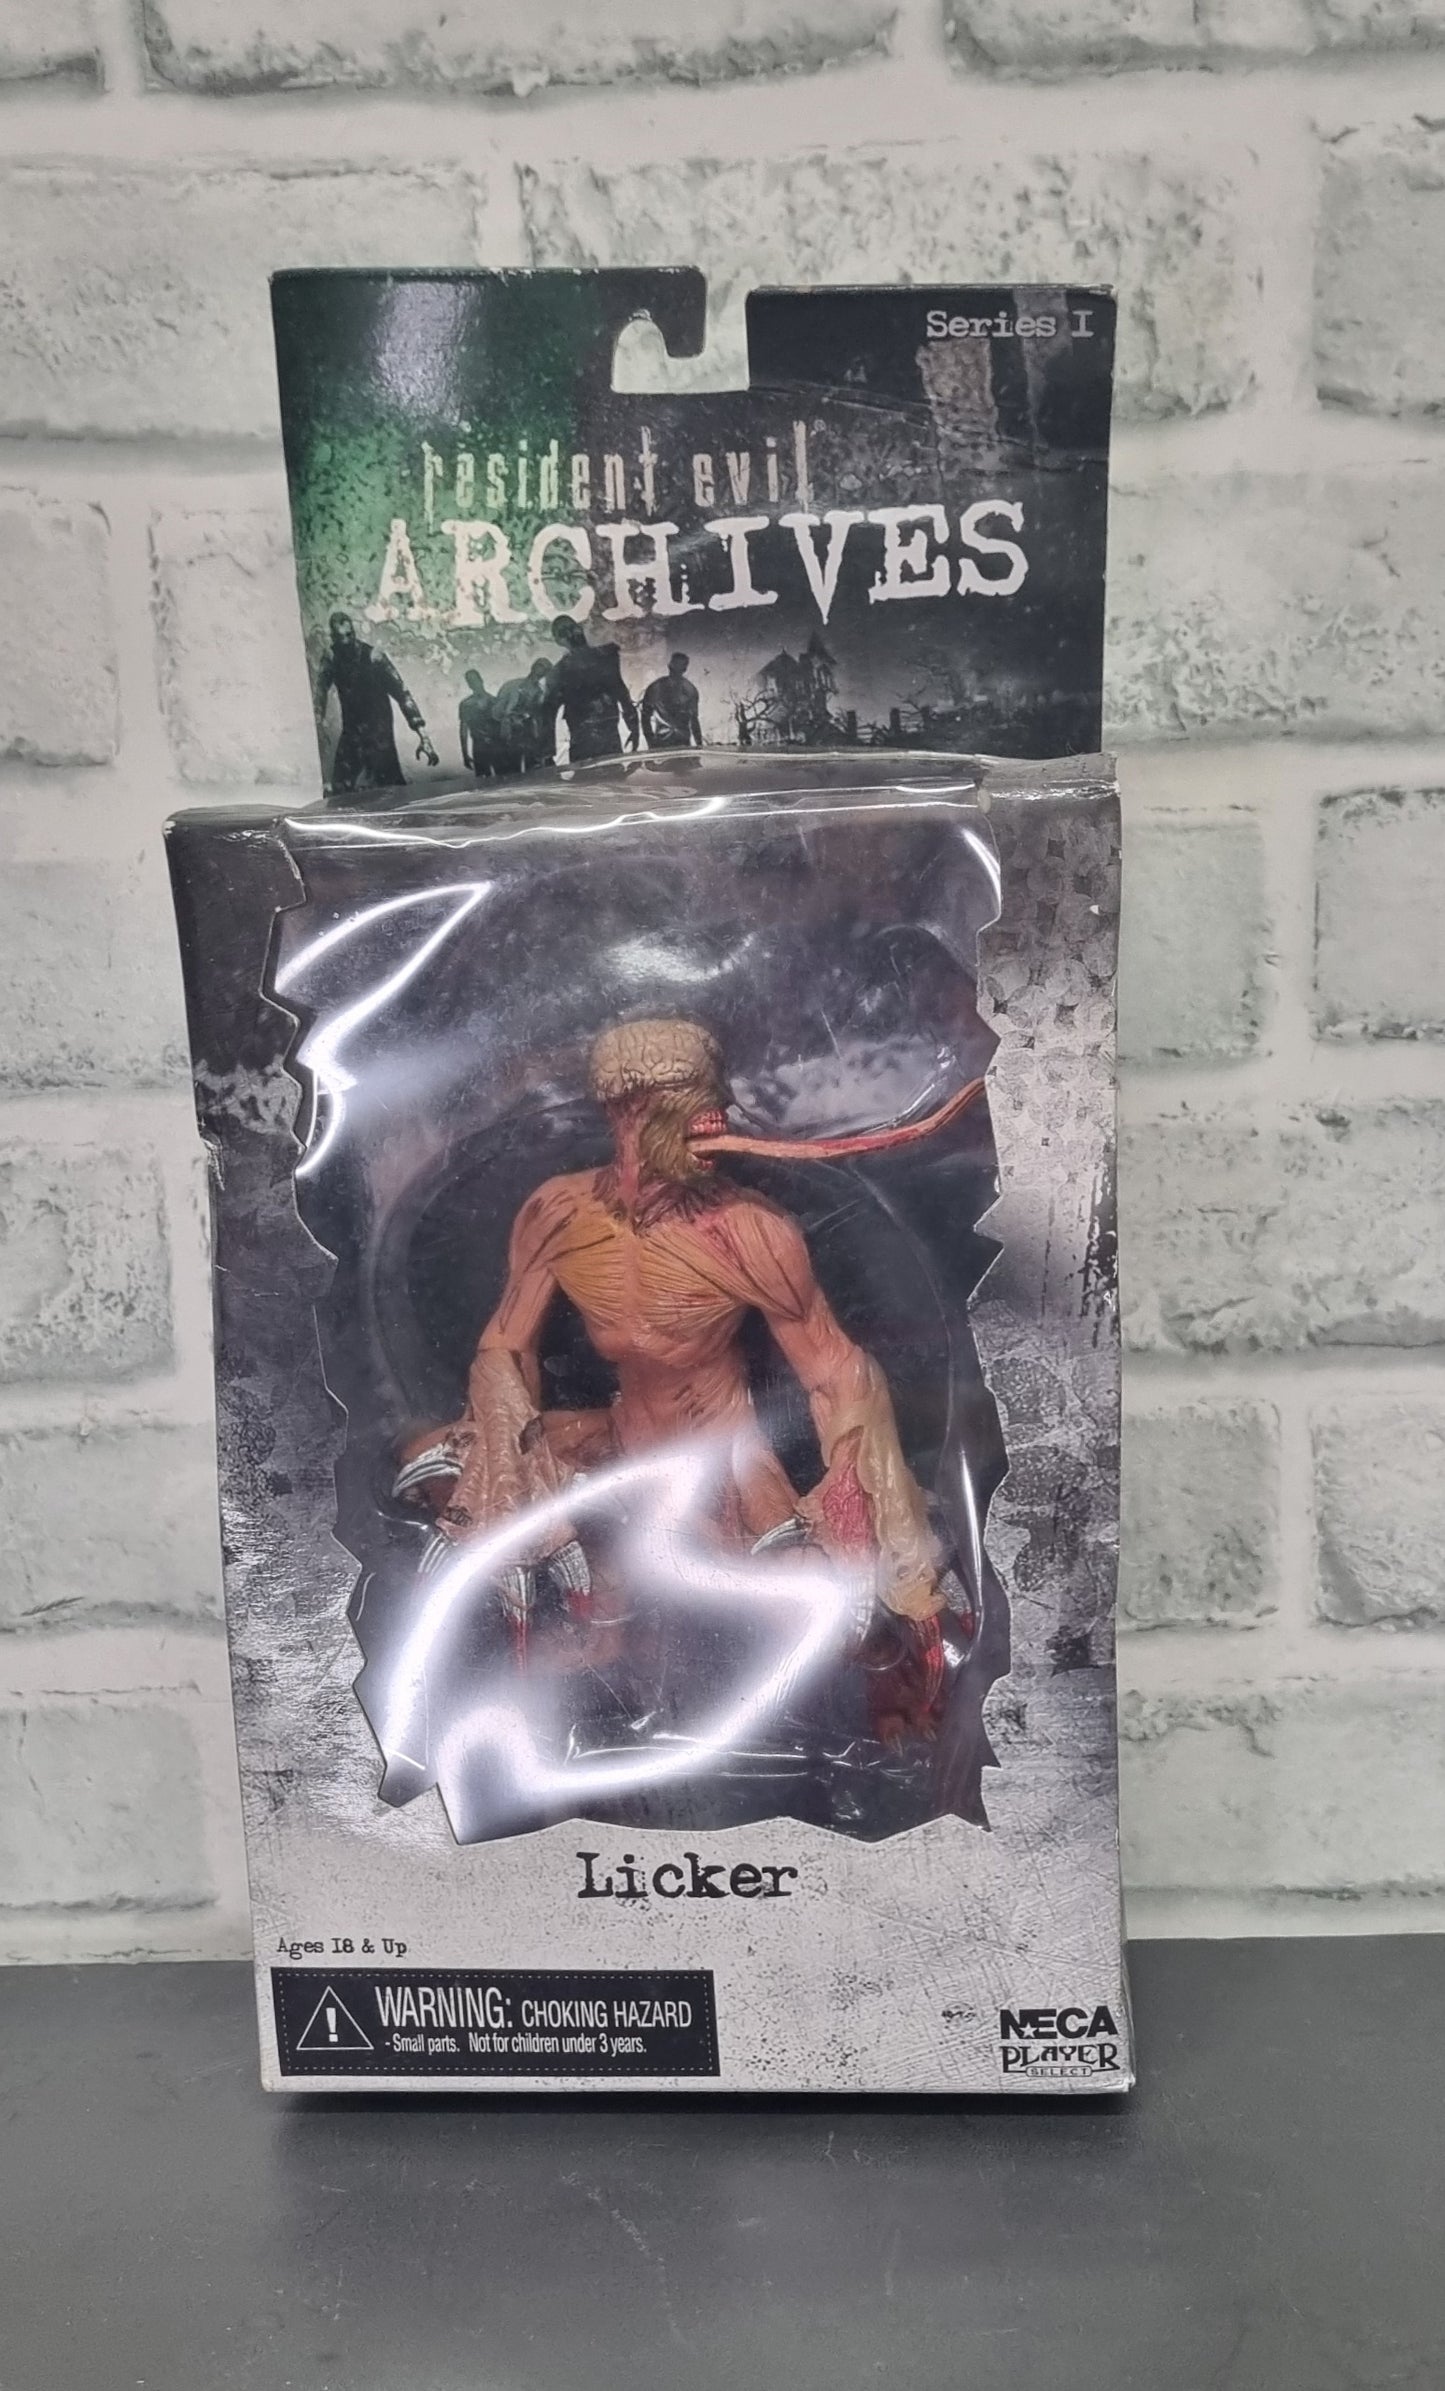 NECA Resident Evil Archives Series 1 Action Figure Licker